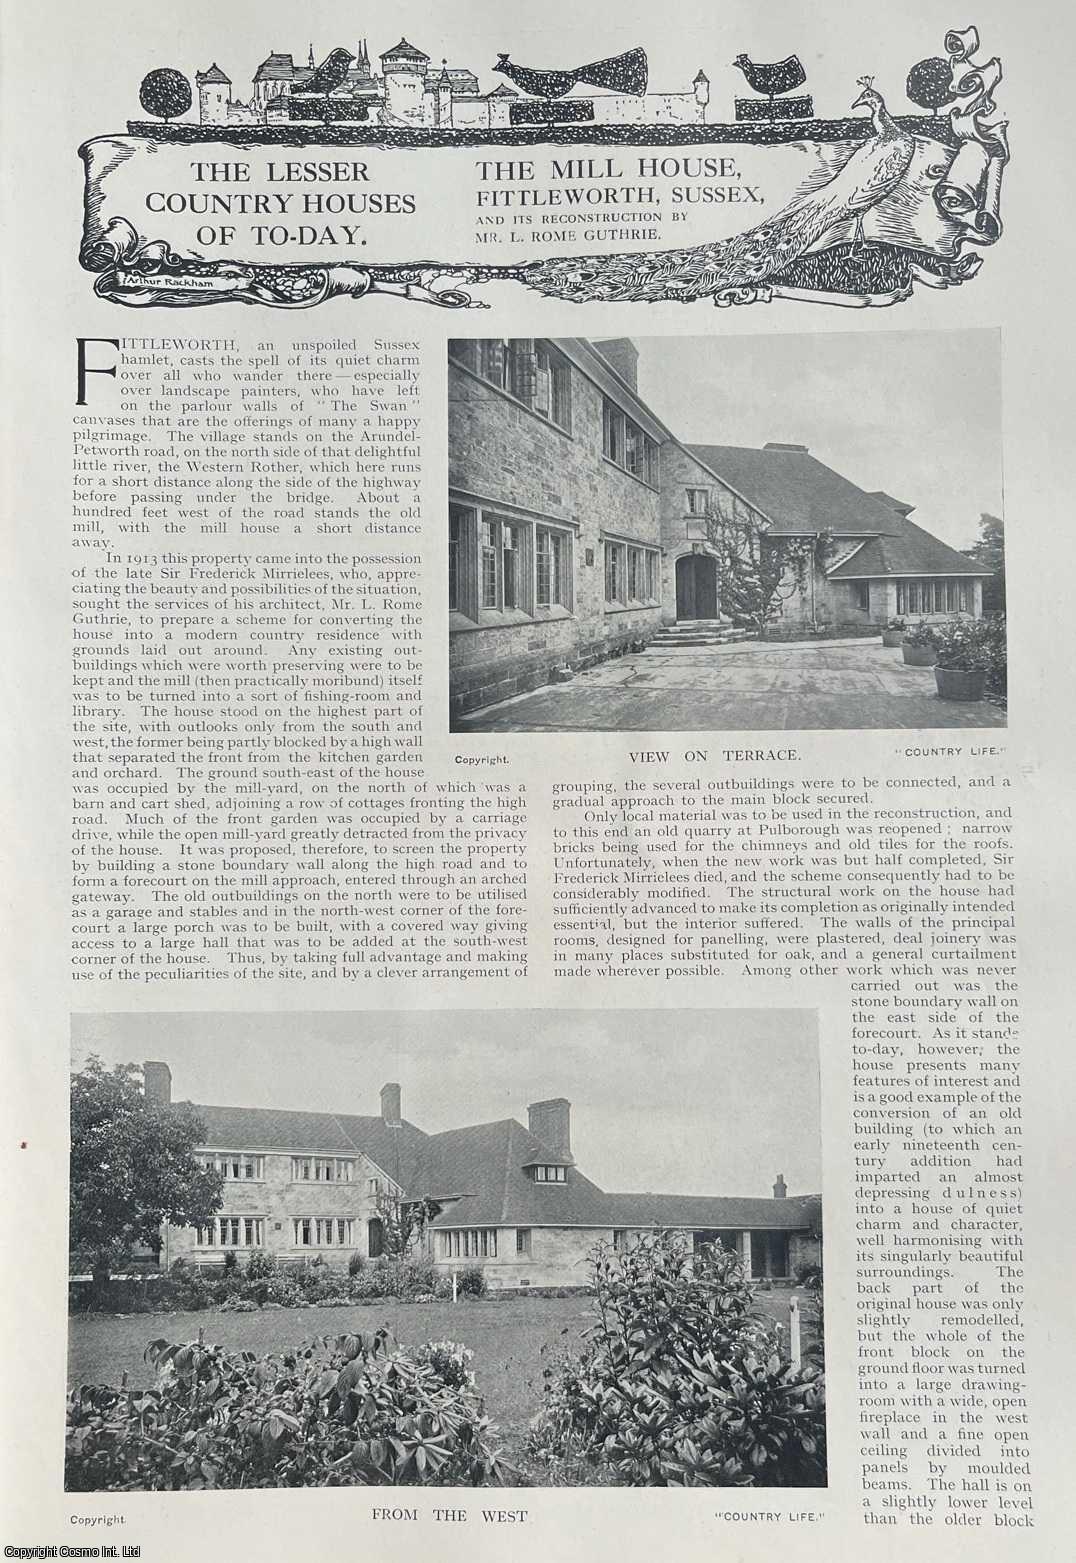 Country Life Magazine - The Mill House, Fittleworth, Sussex, & its Reconstruction by Mr. L. Rome Guthrie. Several pictures and accompanying text, removed from an original issue of Country Life Magazine, 1923.